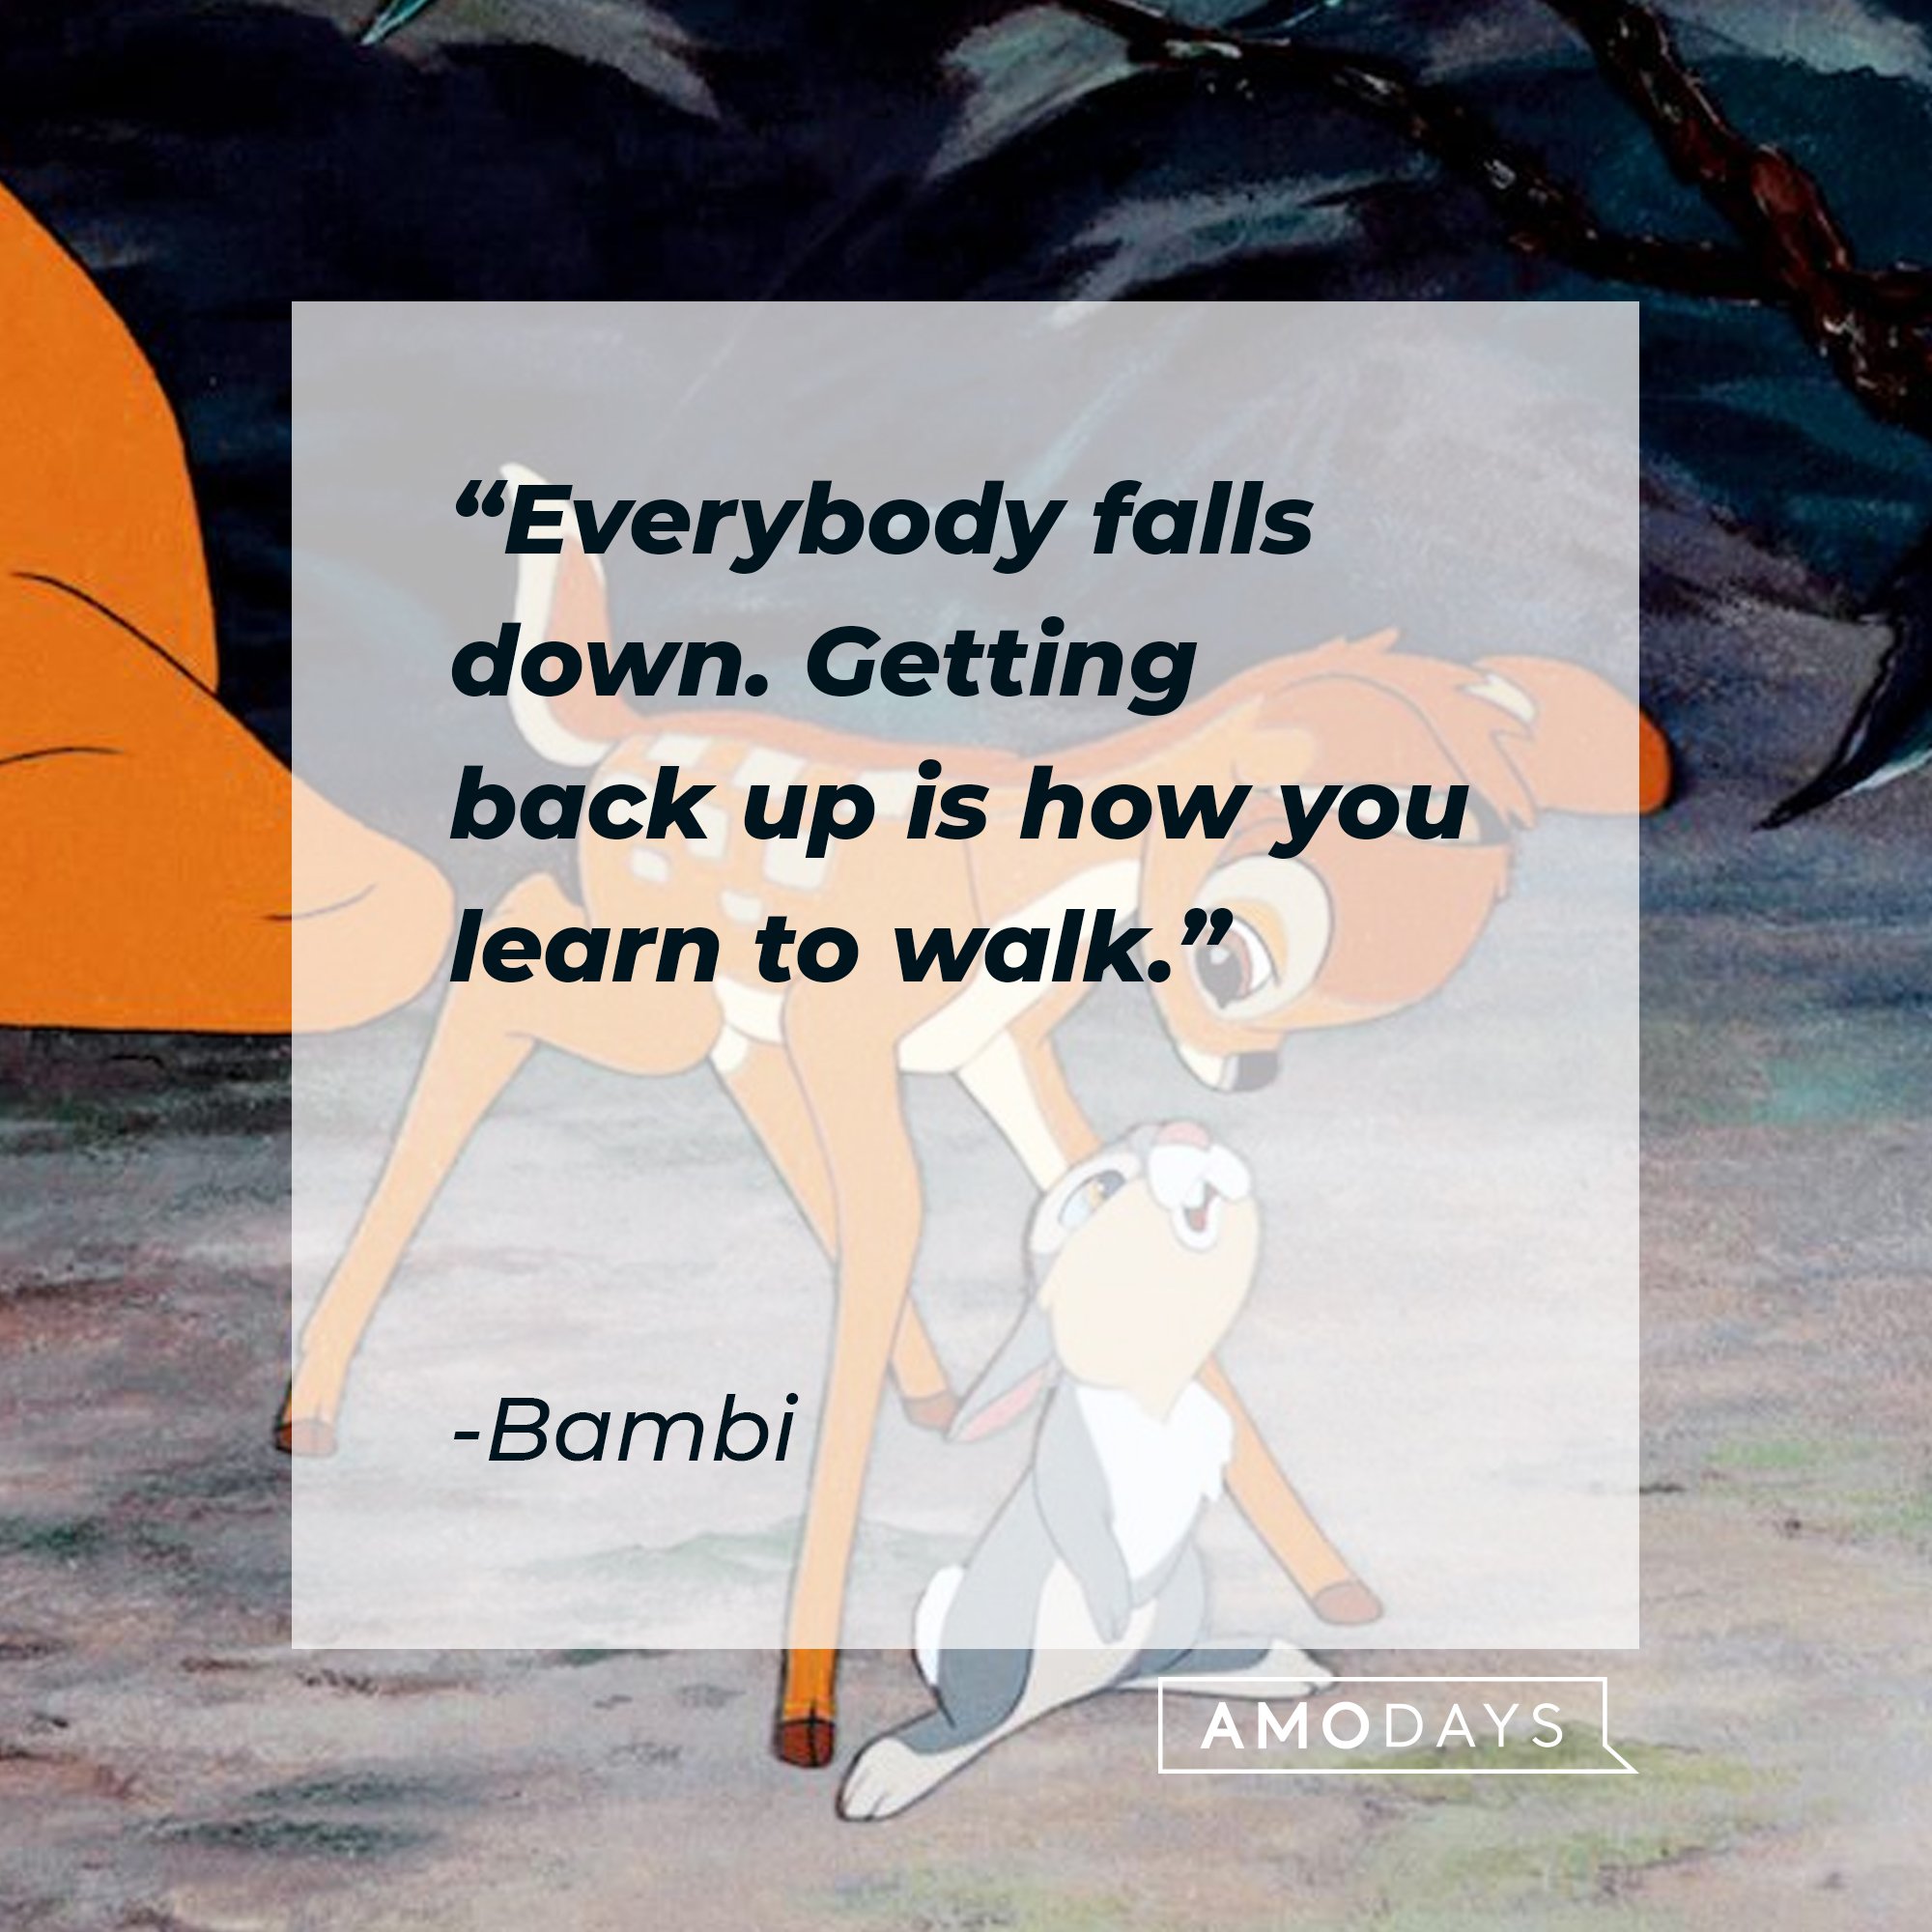 Bambi's quote "Everybody falls down. Getting back up is how you learn to walk." | Source: facebook.com/DisneyBambi